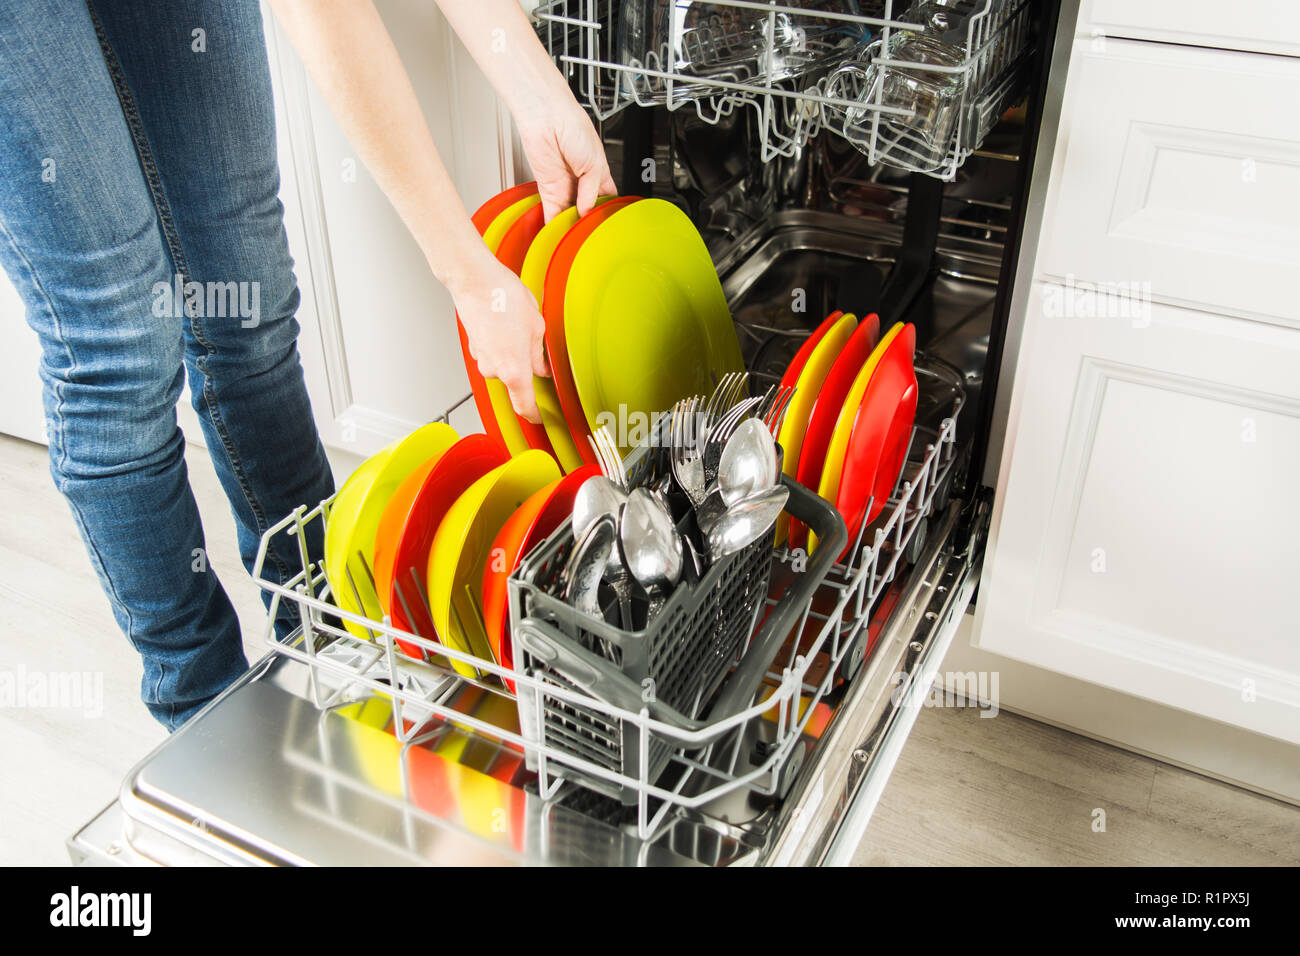 Woman is standing near dishwasher and taking clean plate from it, housework concept Stock Photo